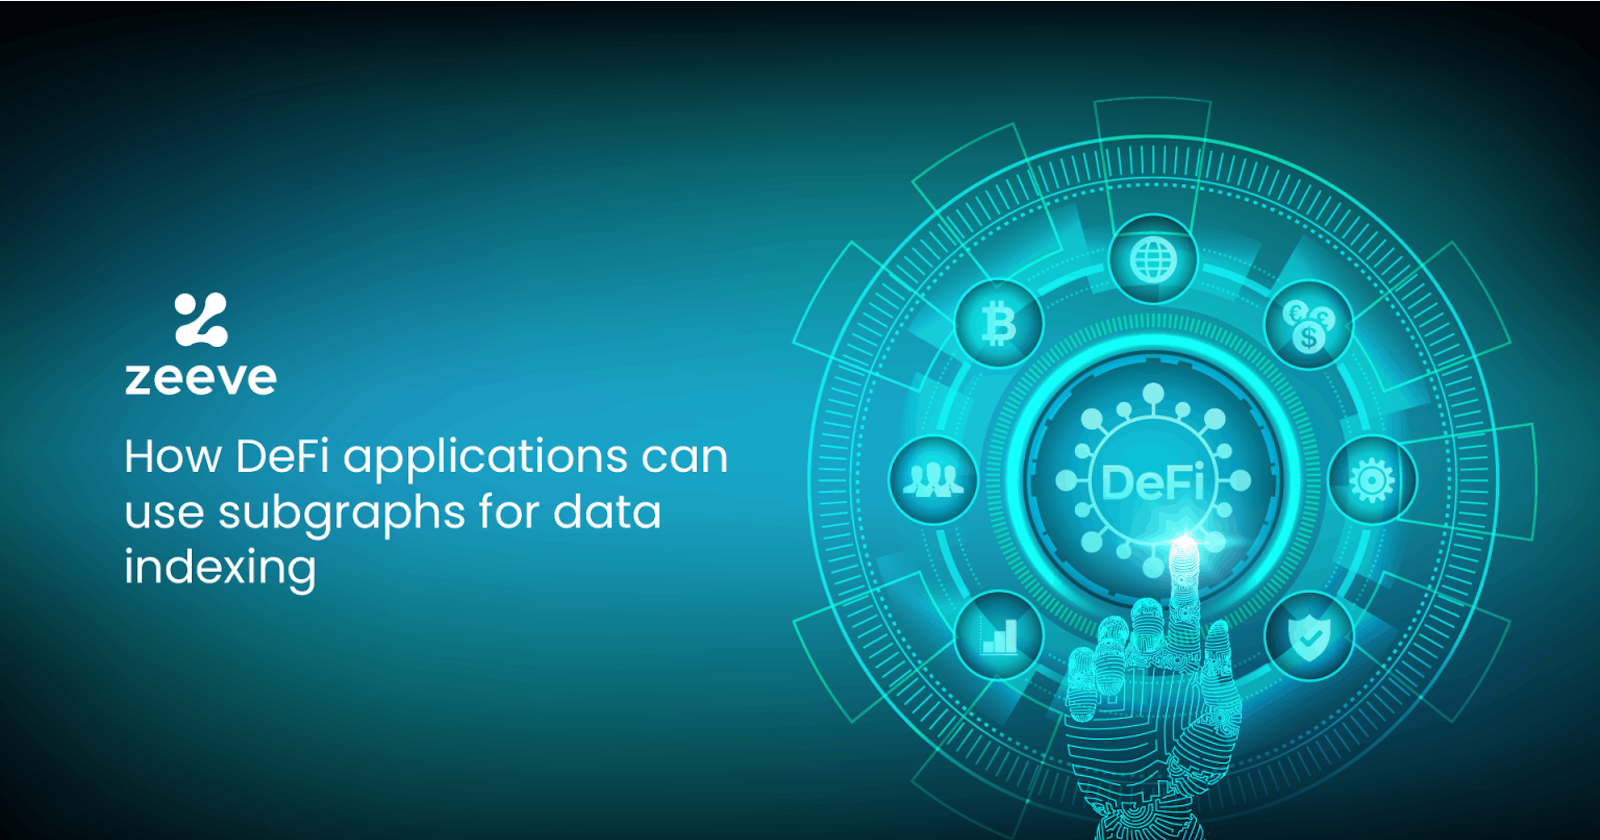 How DeFi Applications can benefit using Subgraphs for data indexing?